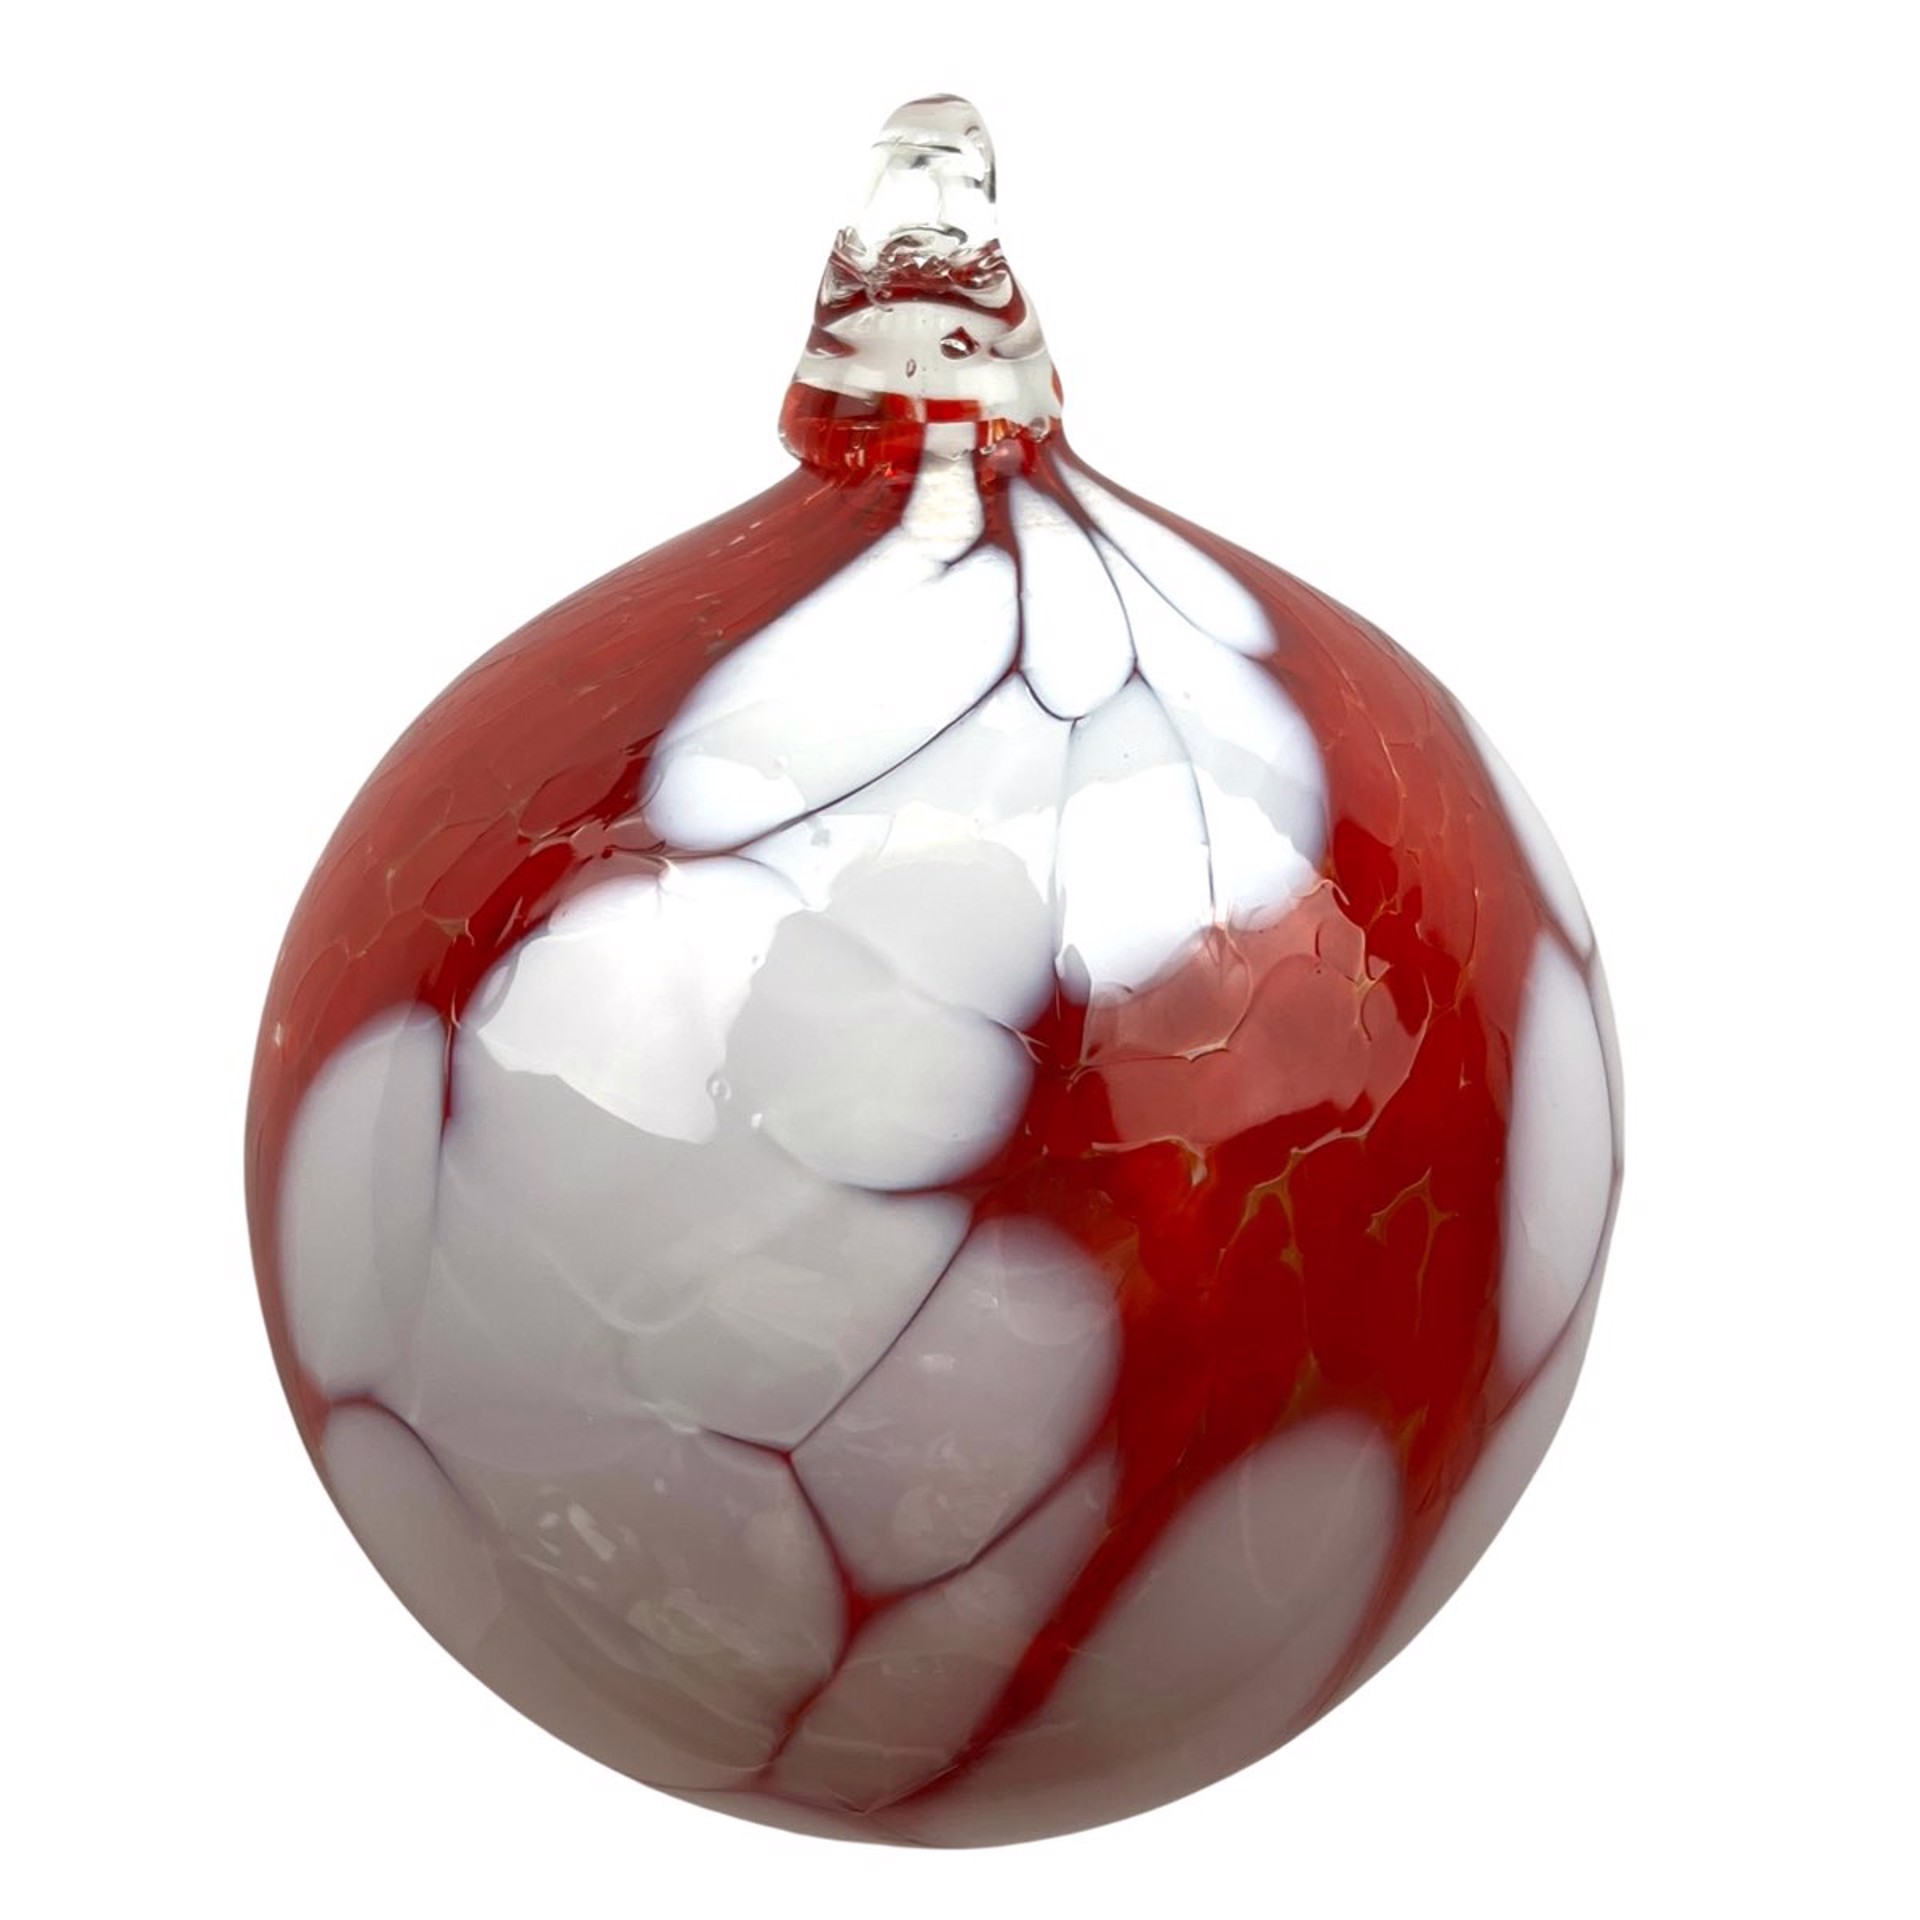 Ornament by Chad Balster